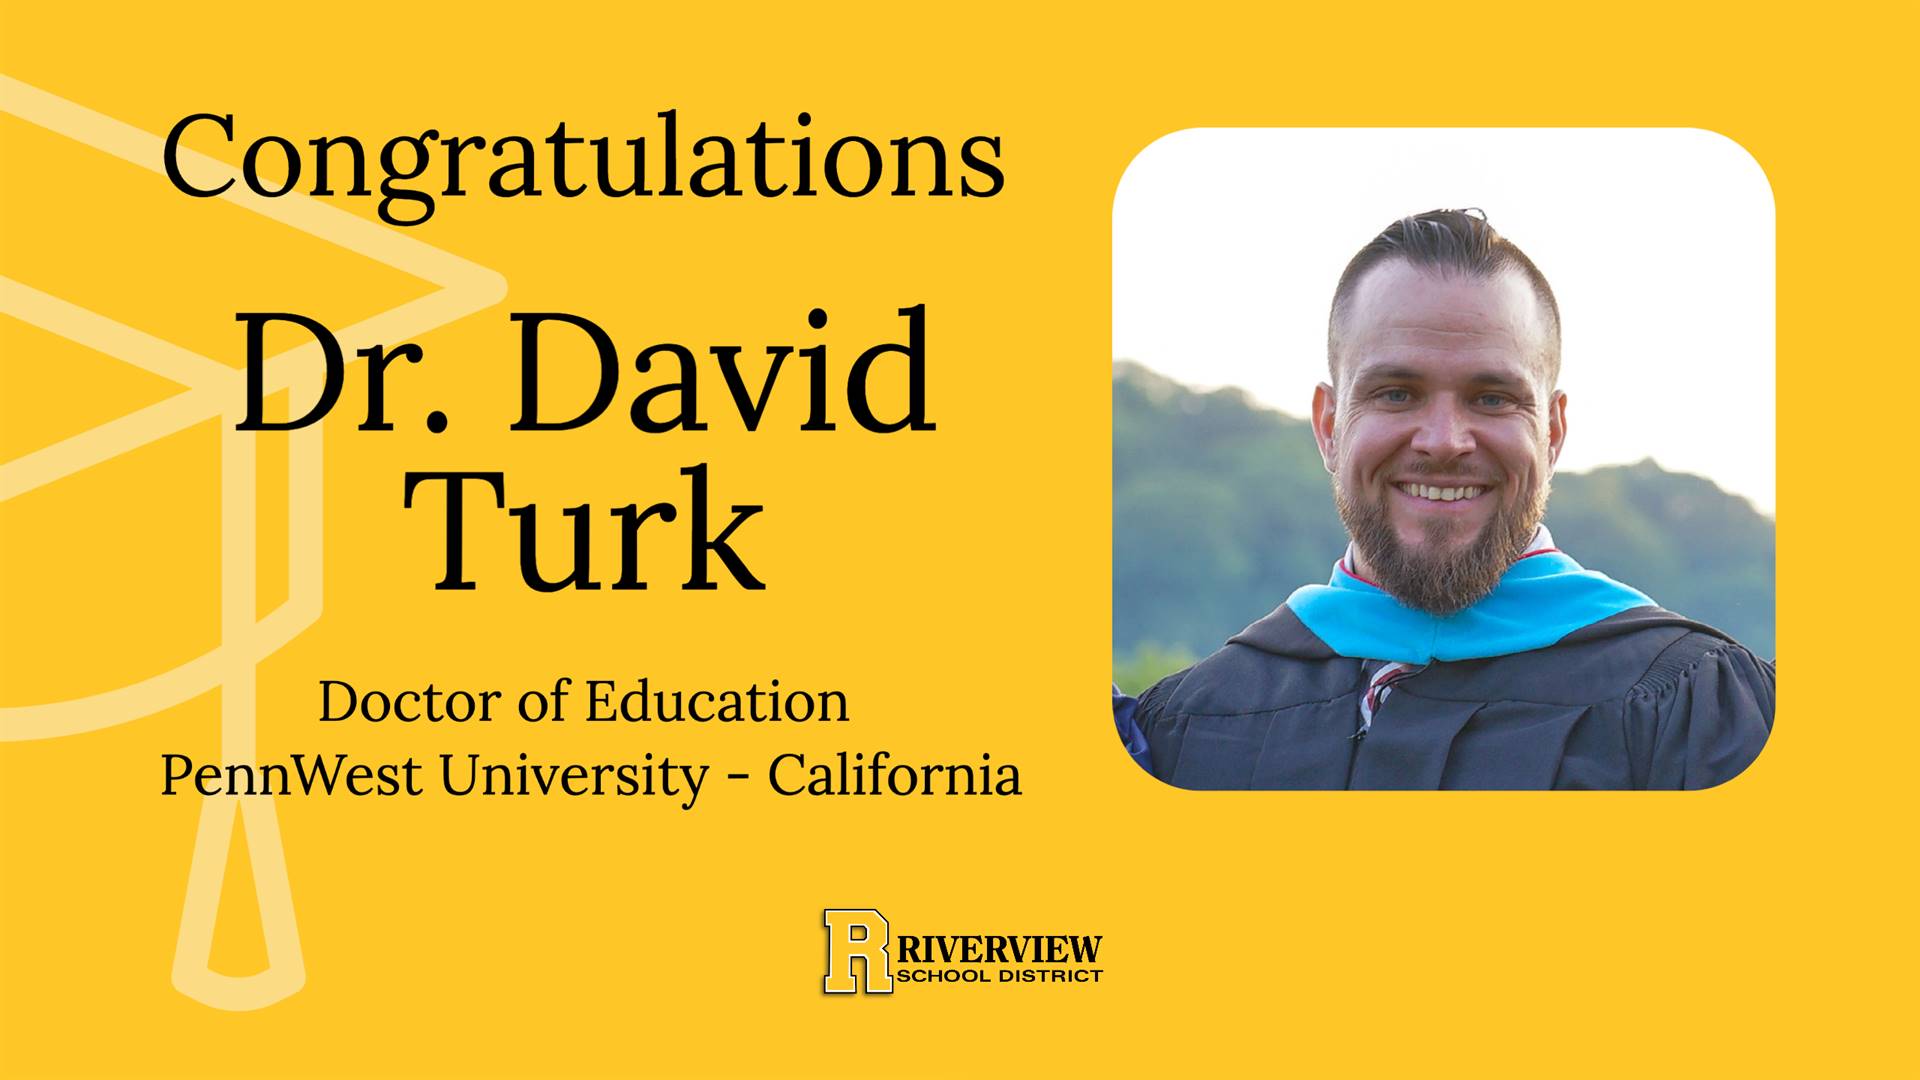 Congratulations Dr. David Turk on earning your doctorate from PennWest University!